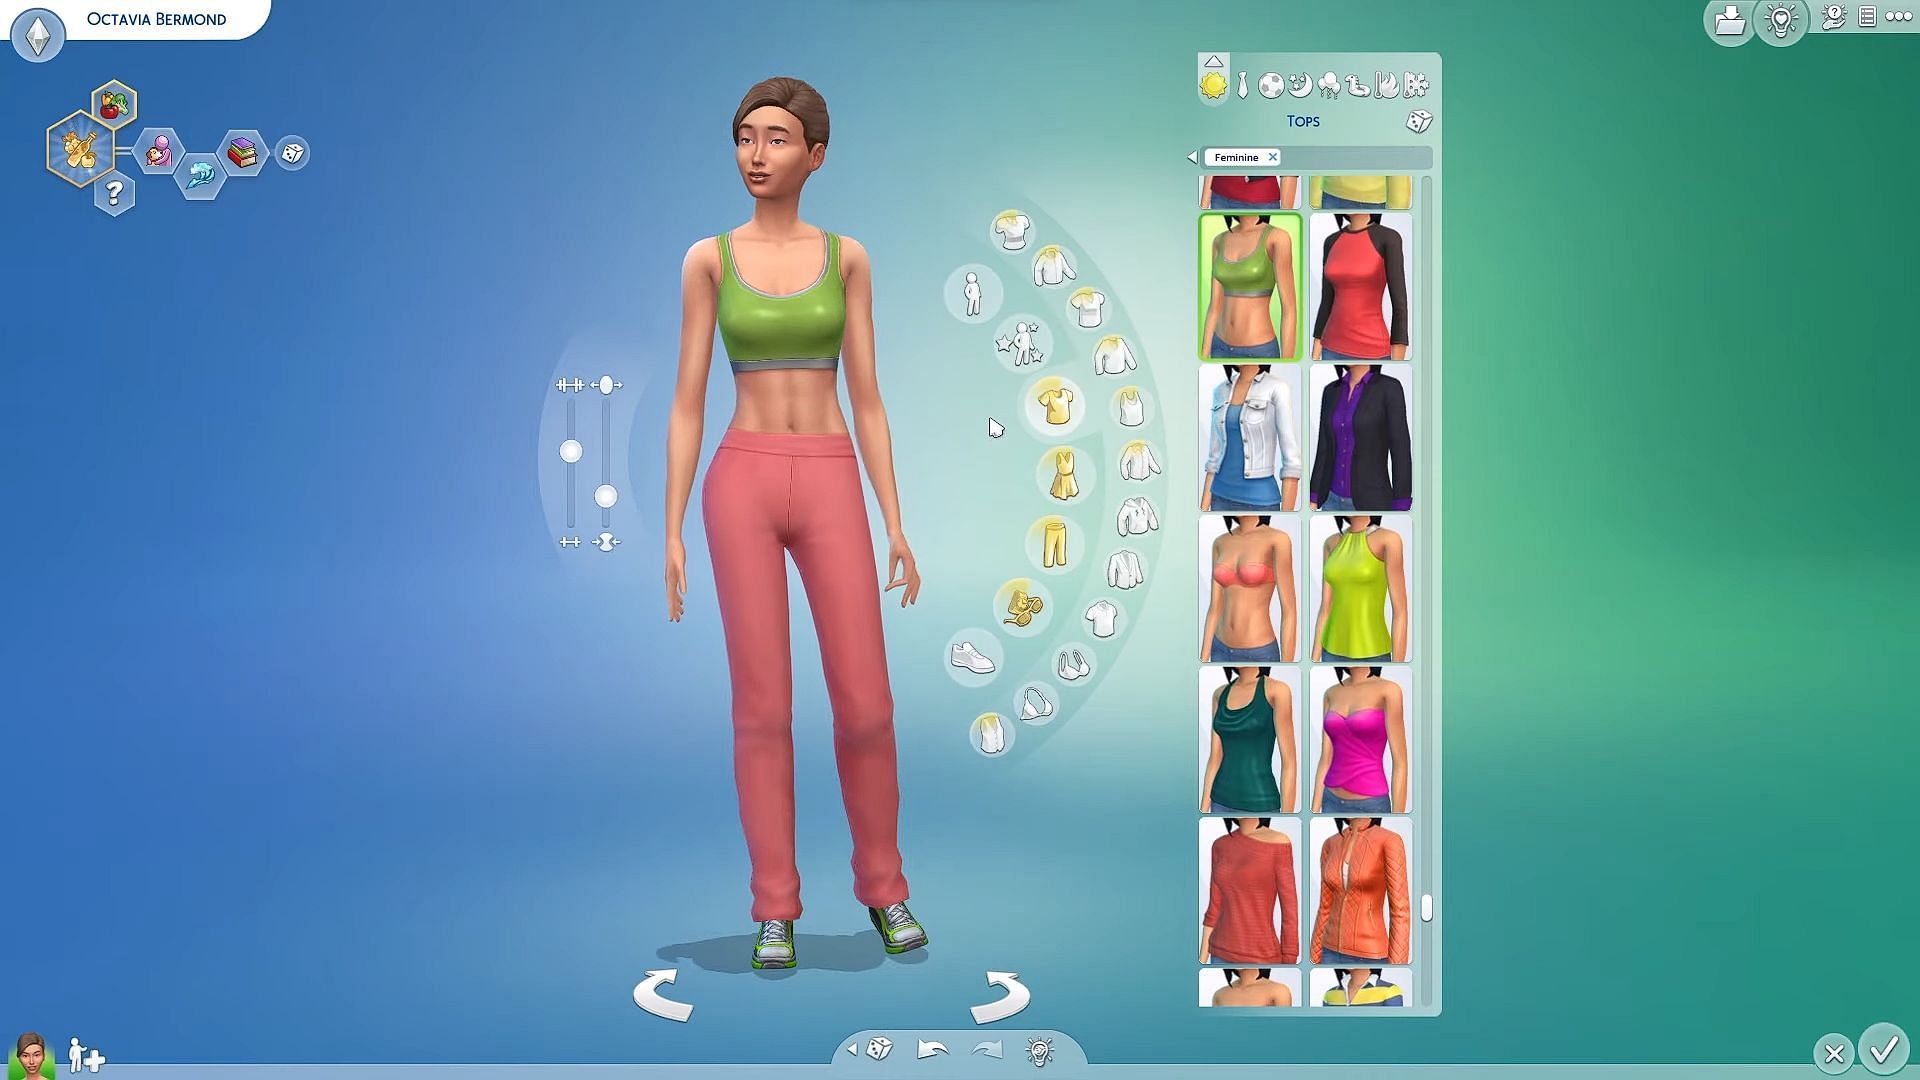 Changing work outfits in the Sims 4 CAS.